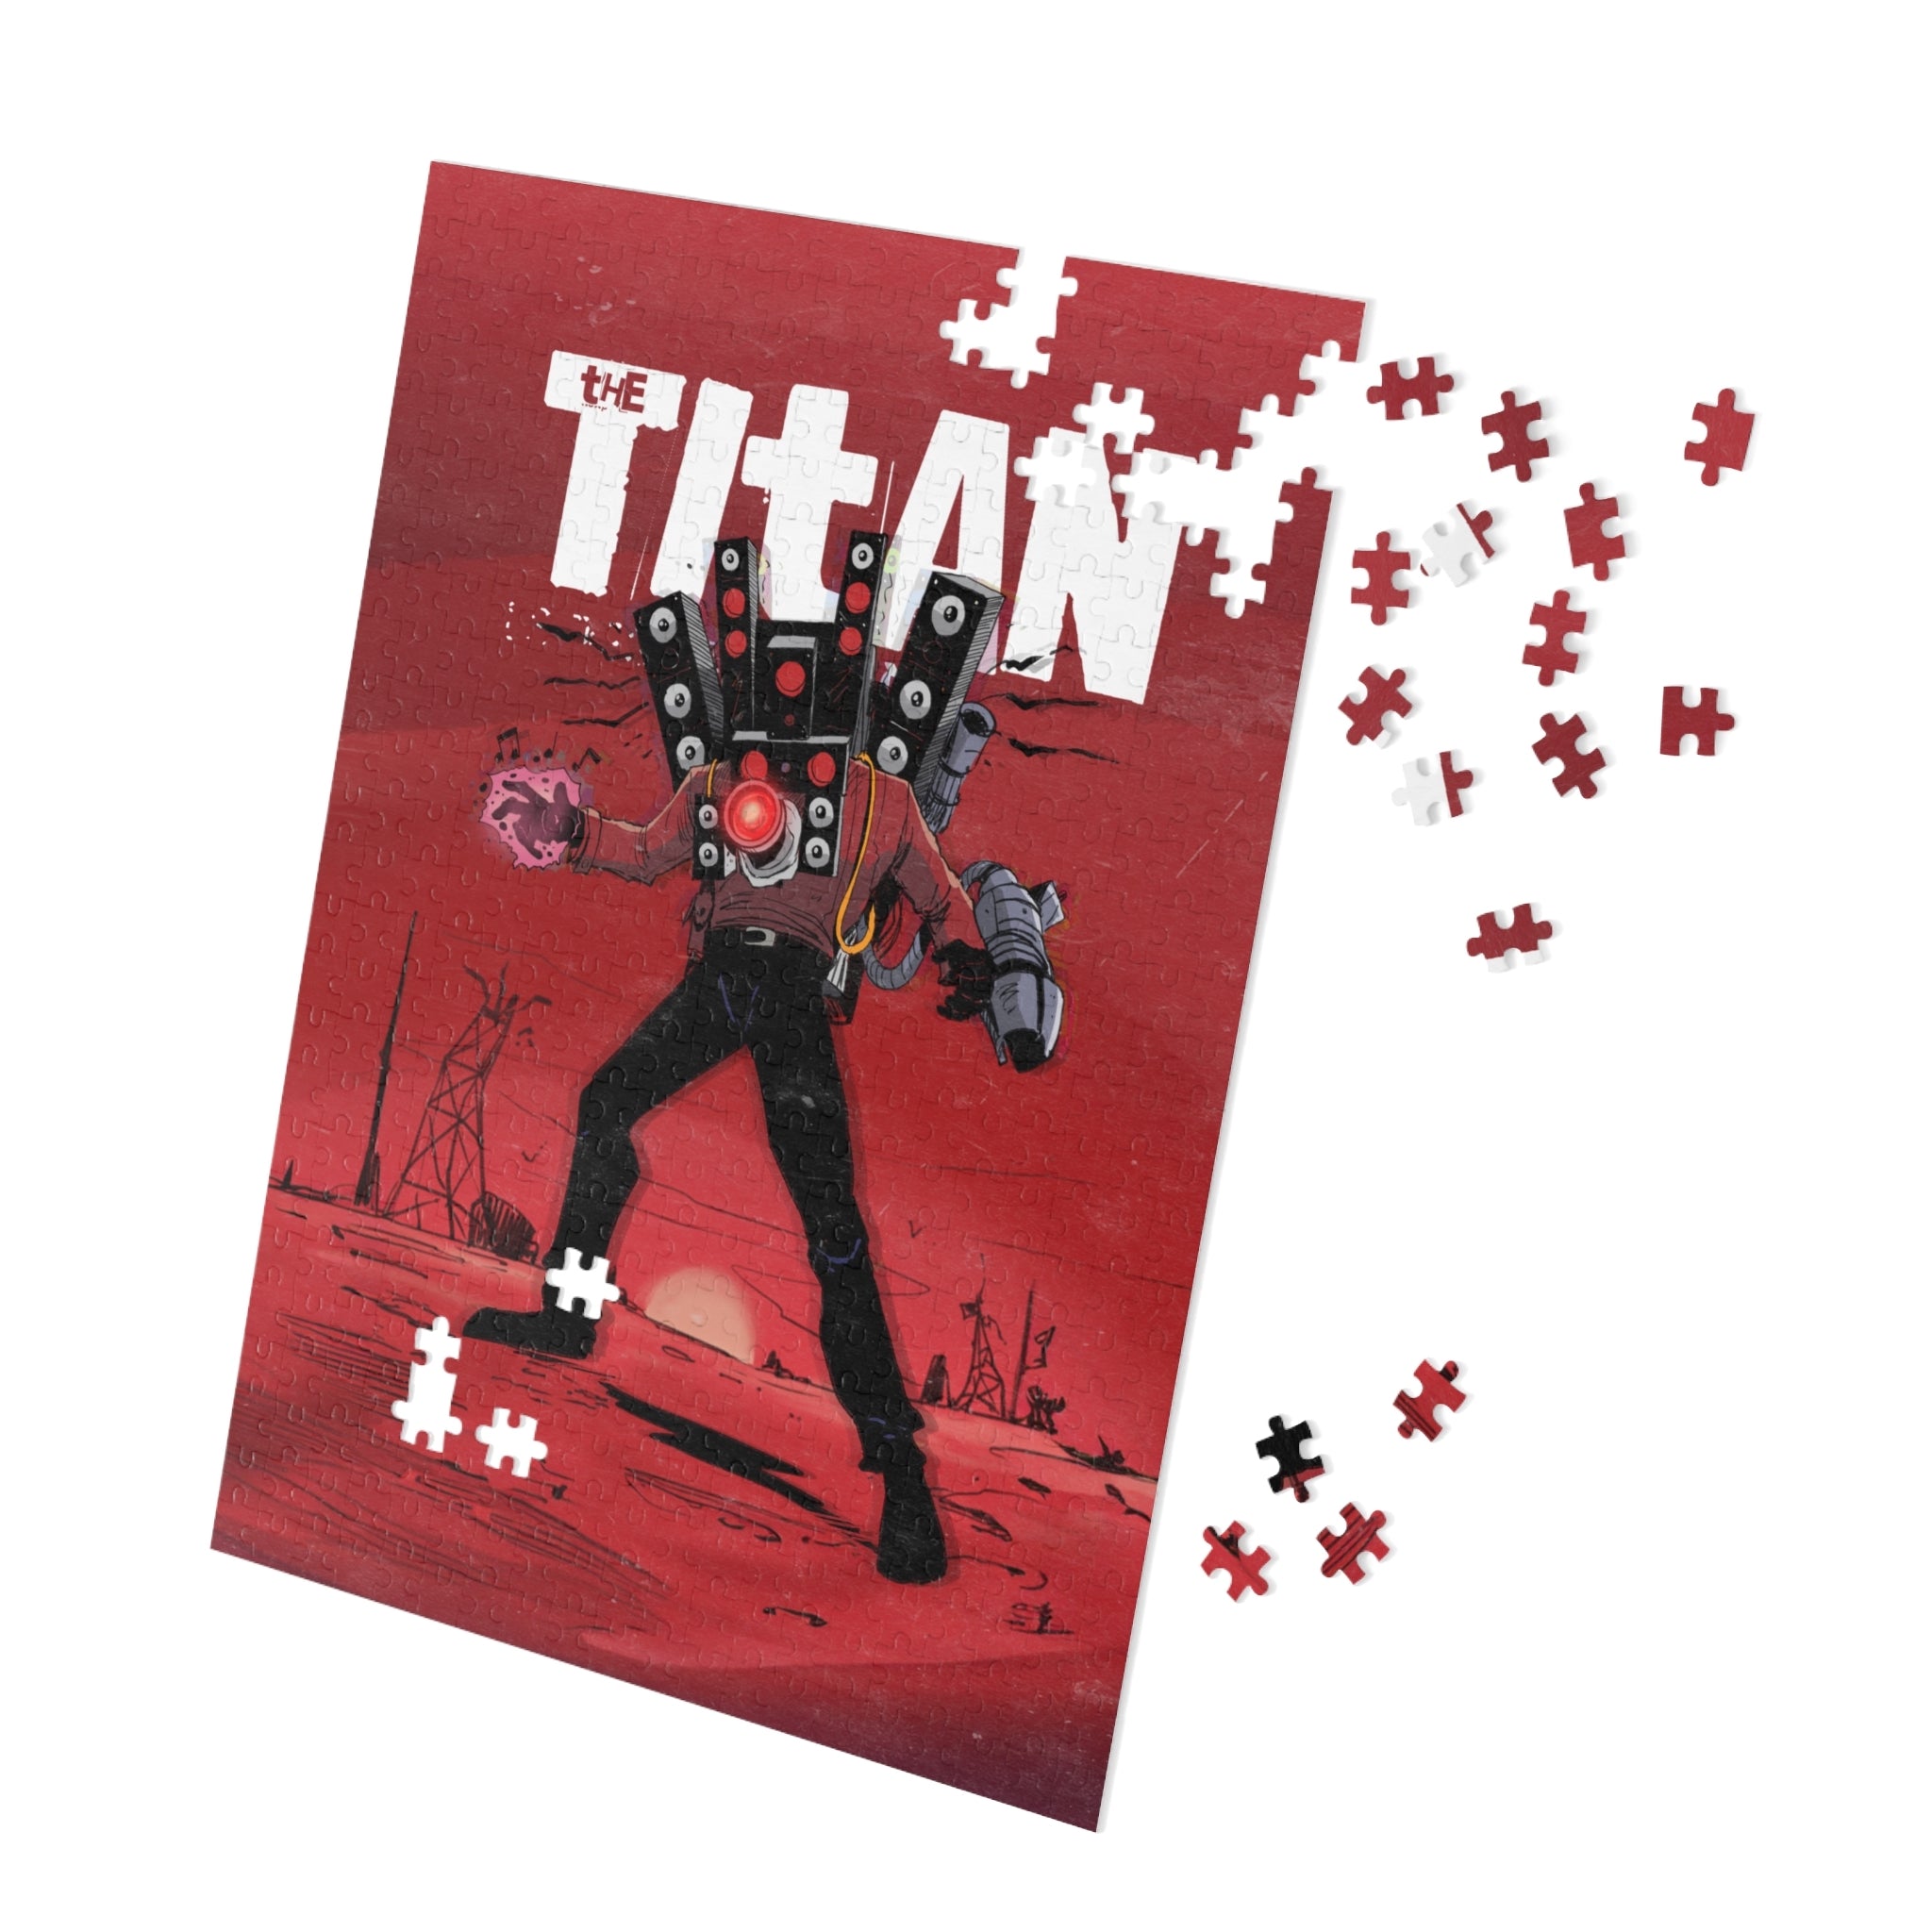 500-piece jigsaw puzzle showcasing Titan Speakerman design. with pieces coming out of it